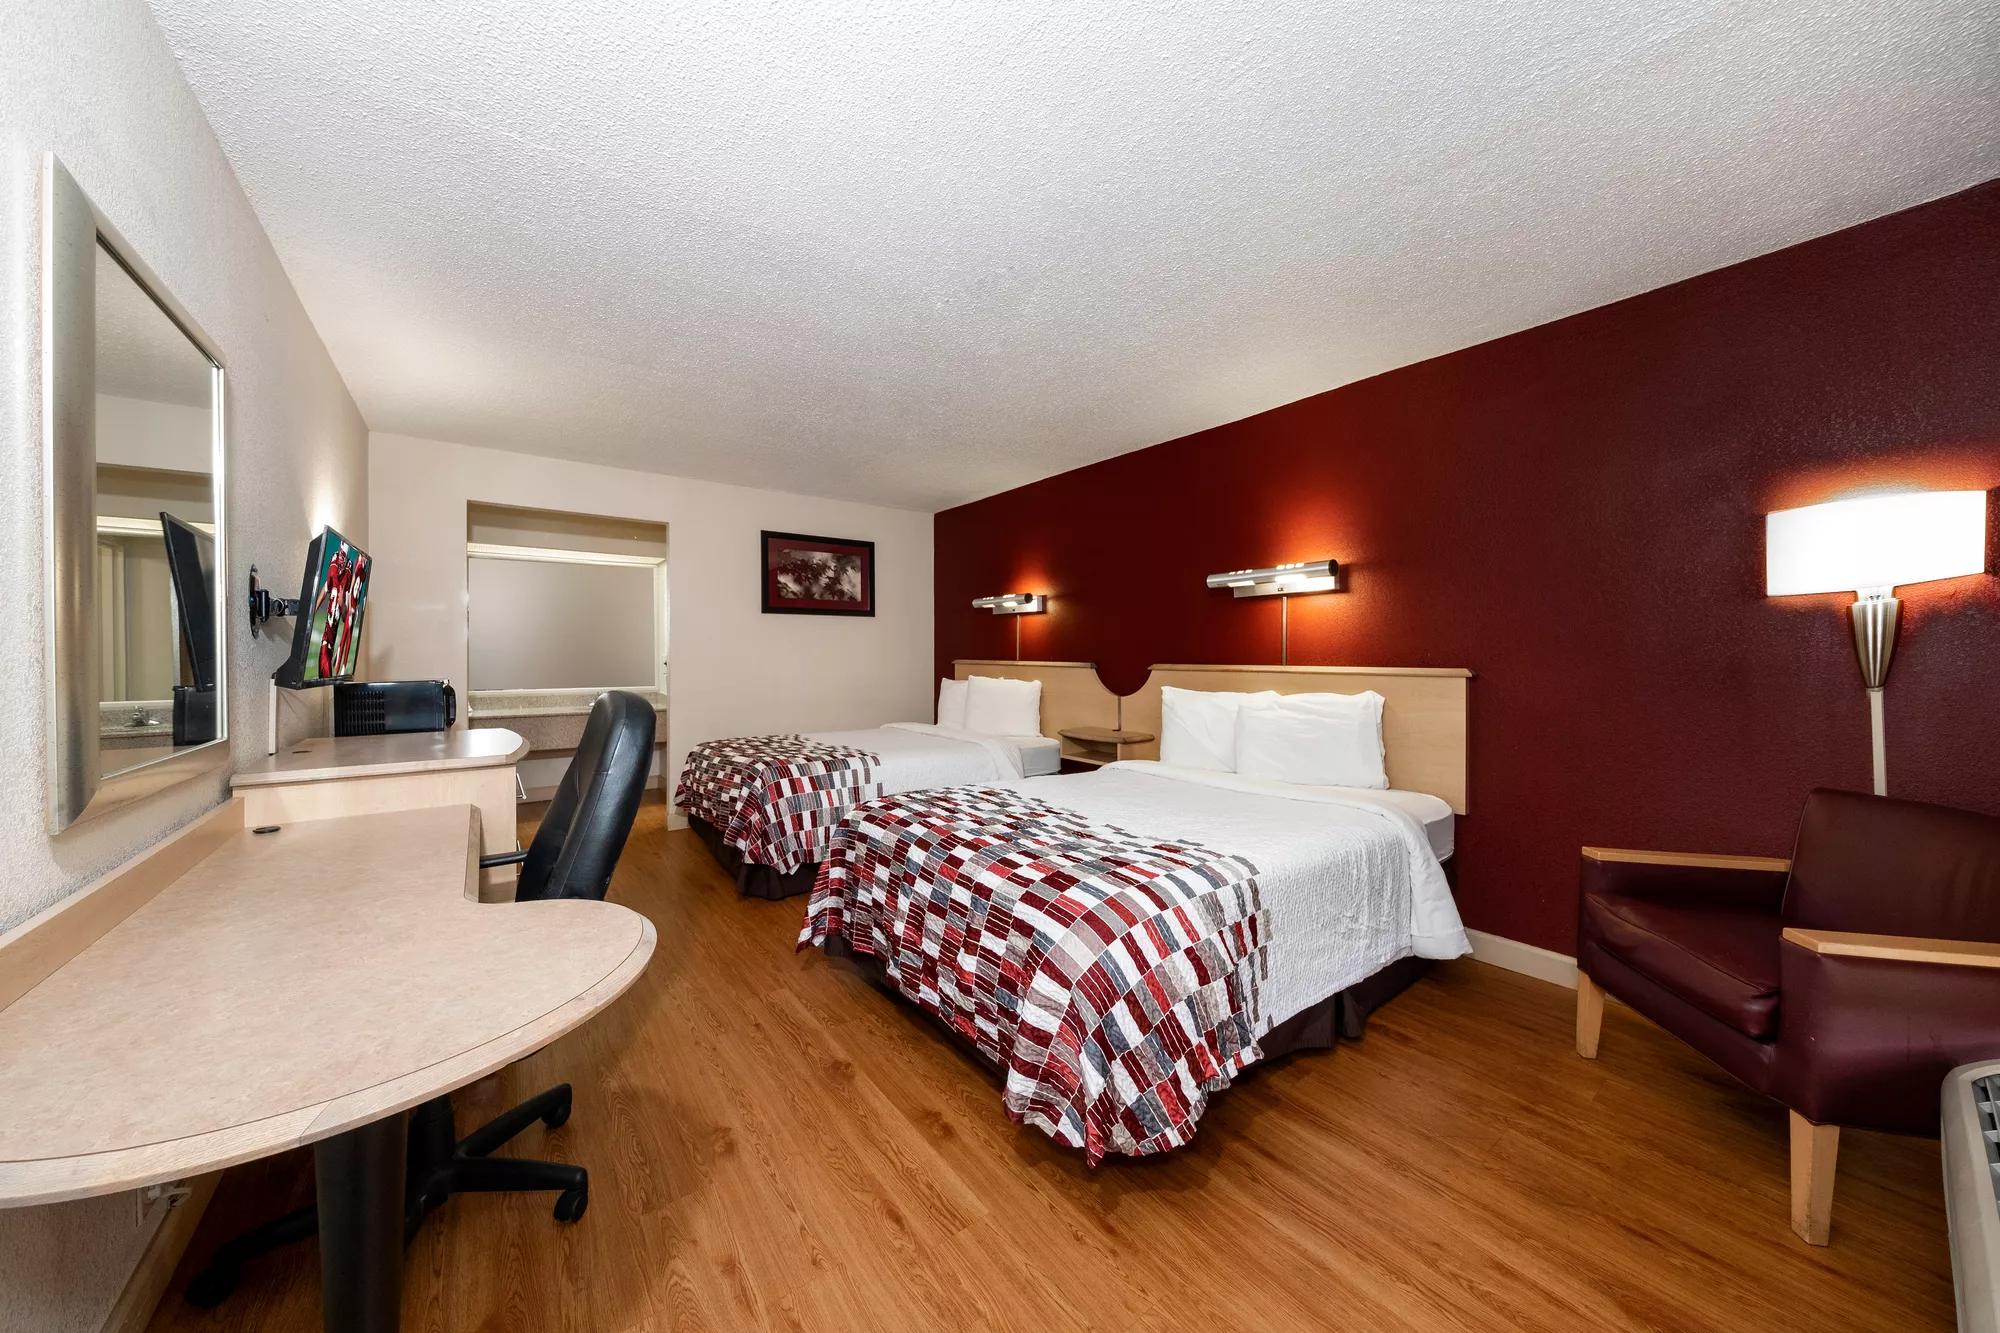 Red Roof Inn & Suites Wytheville Deluxe Double Room Image